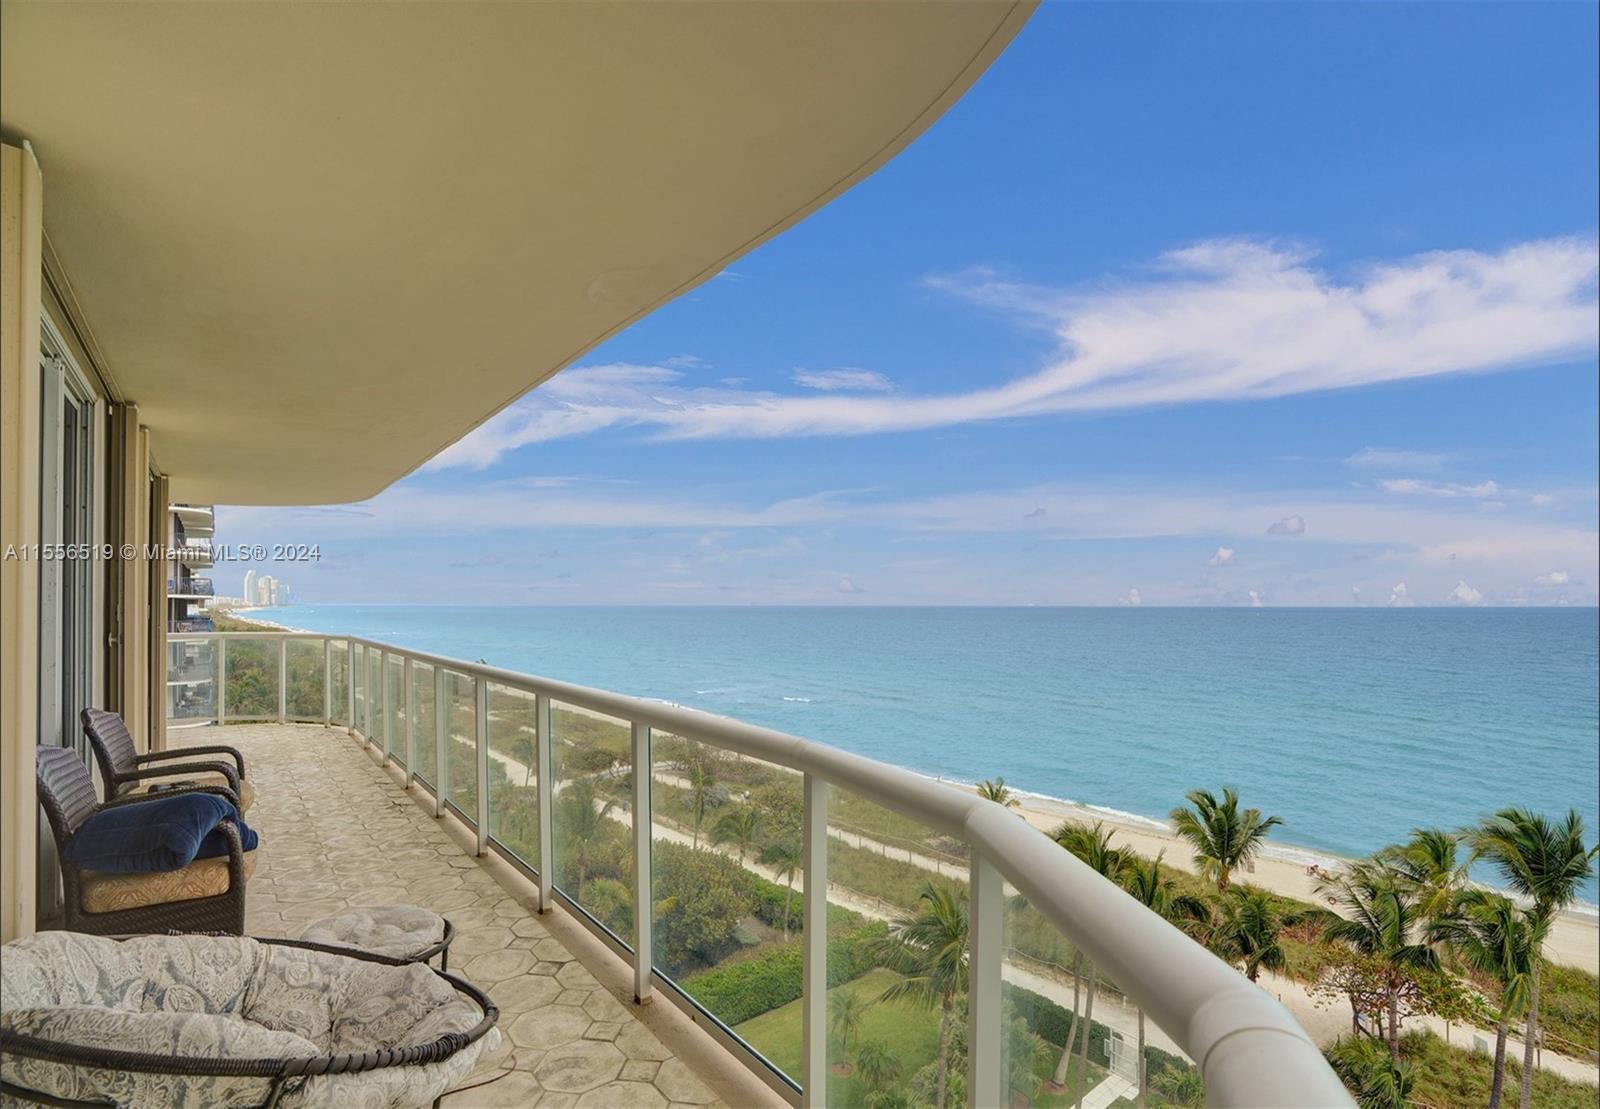 FRONT BEACH Spacious and comfortable 3 bedroom apartment in the Town of Surfside, at the Luxurious O